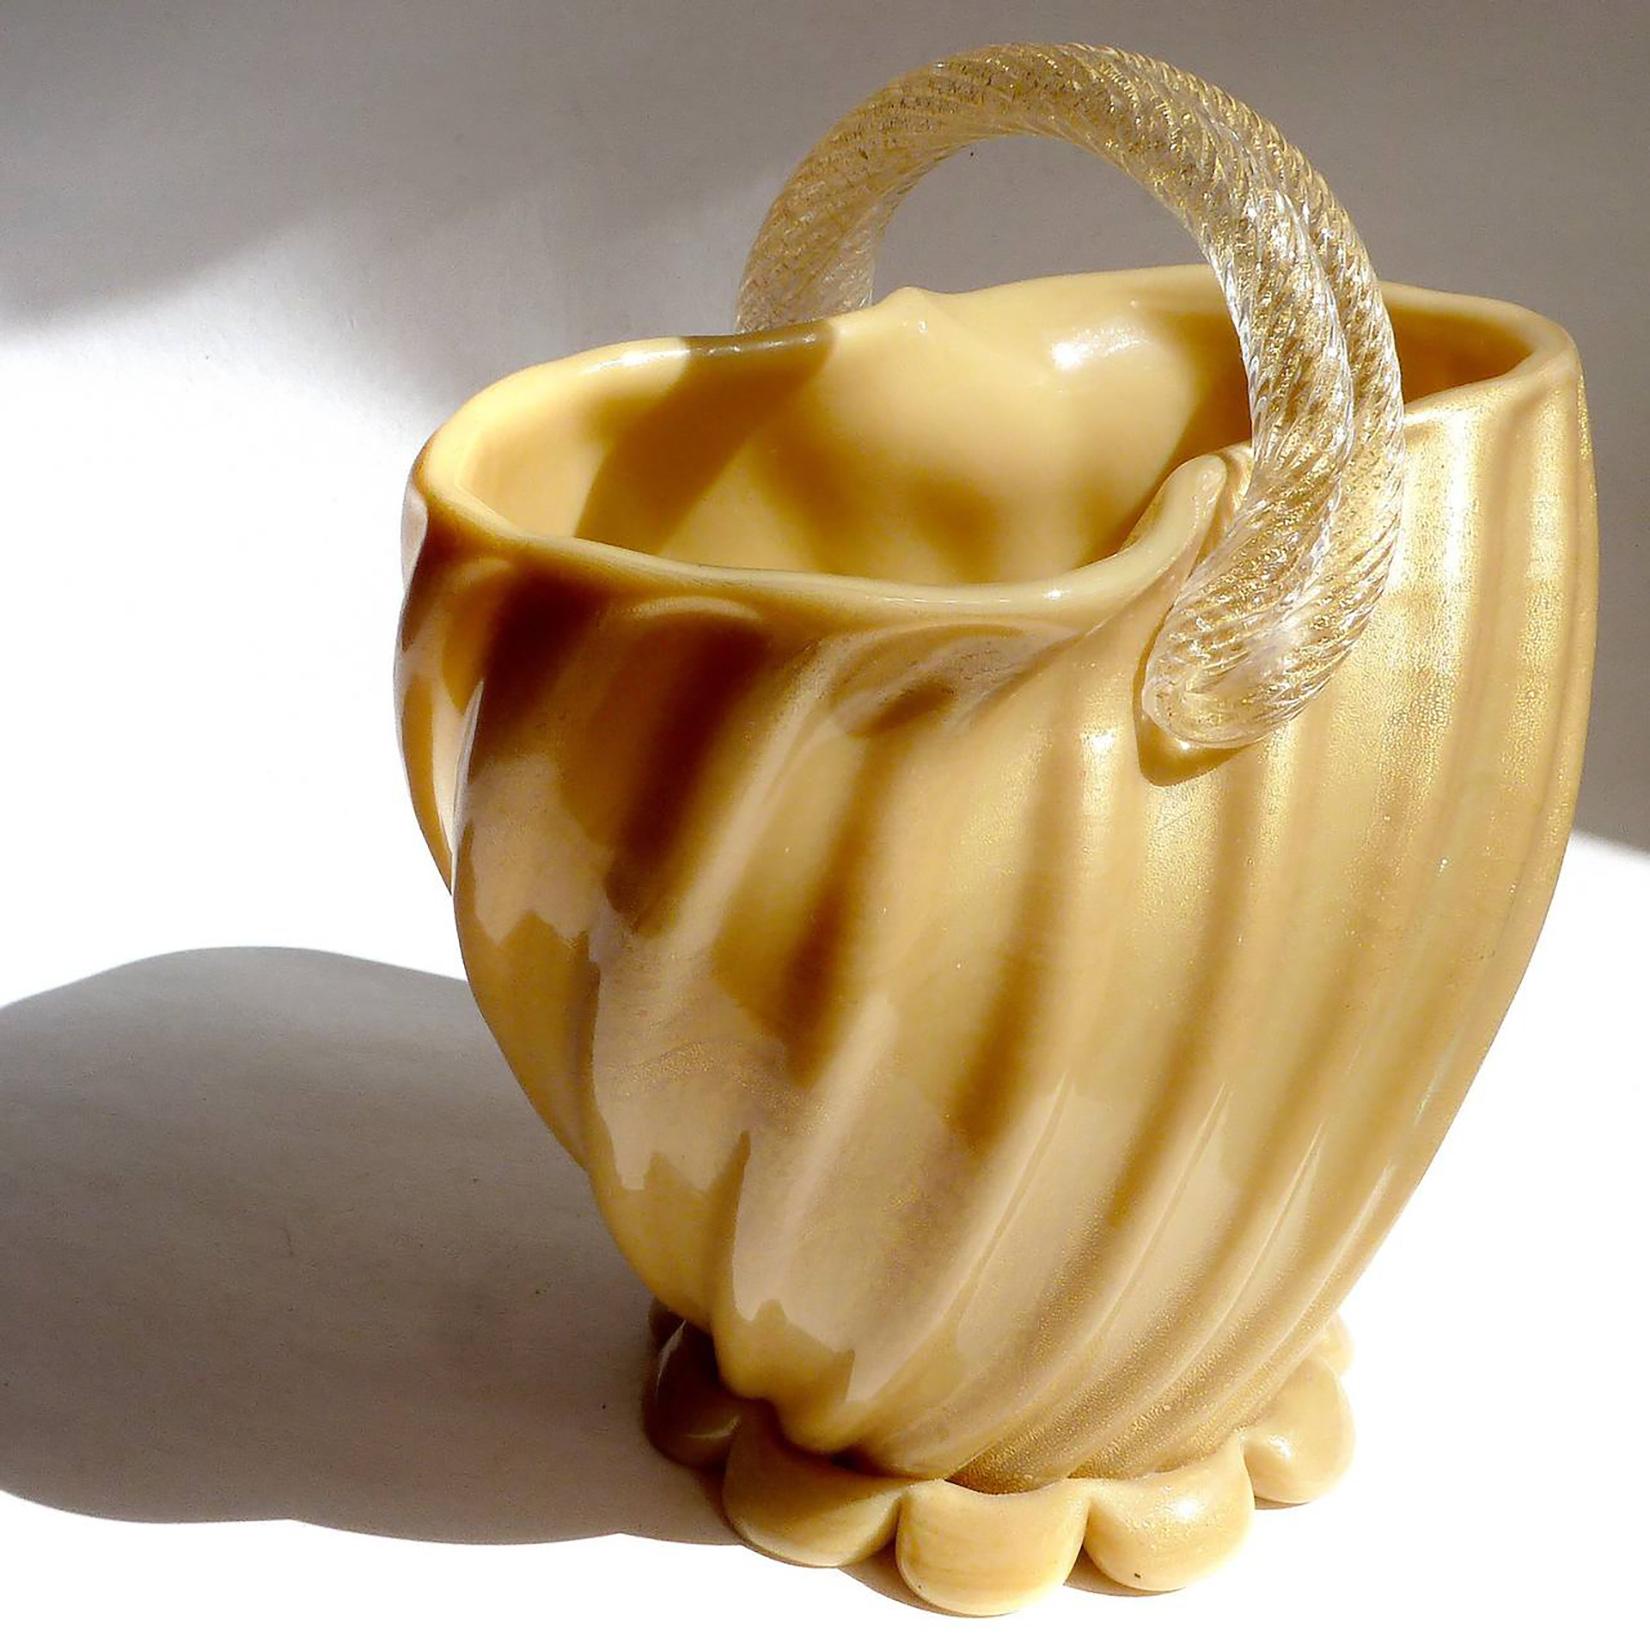 Rare and beautiful, large vintage Murano hand blown yellow and gold flecks Italian art glass basket flower vase. Documented to designer Archimede Seguso, circa 1952. This particular piece was photographed by me, and published in the Archimede Seguso